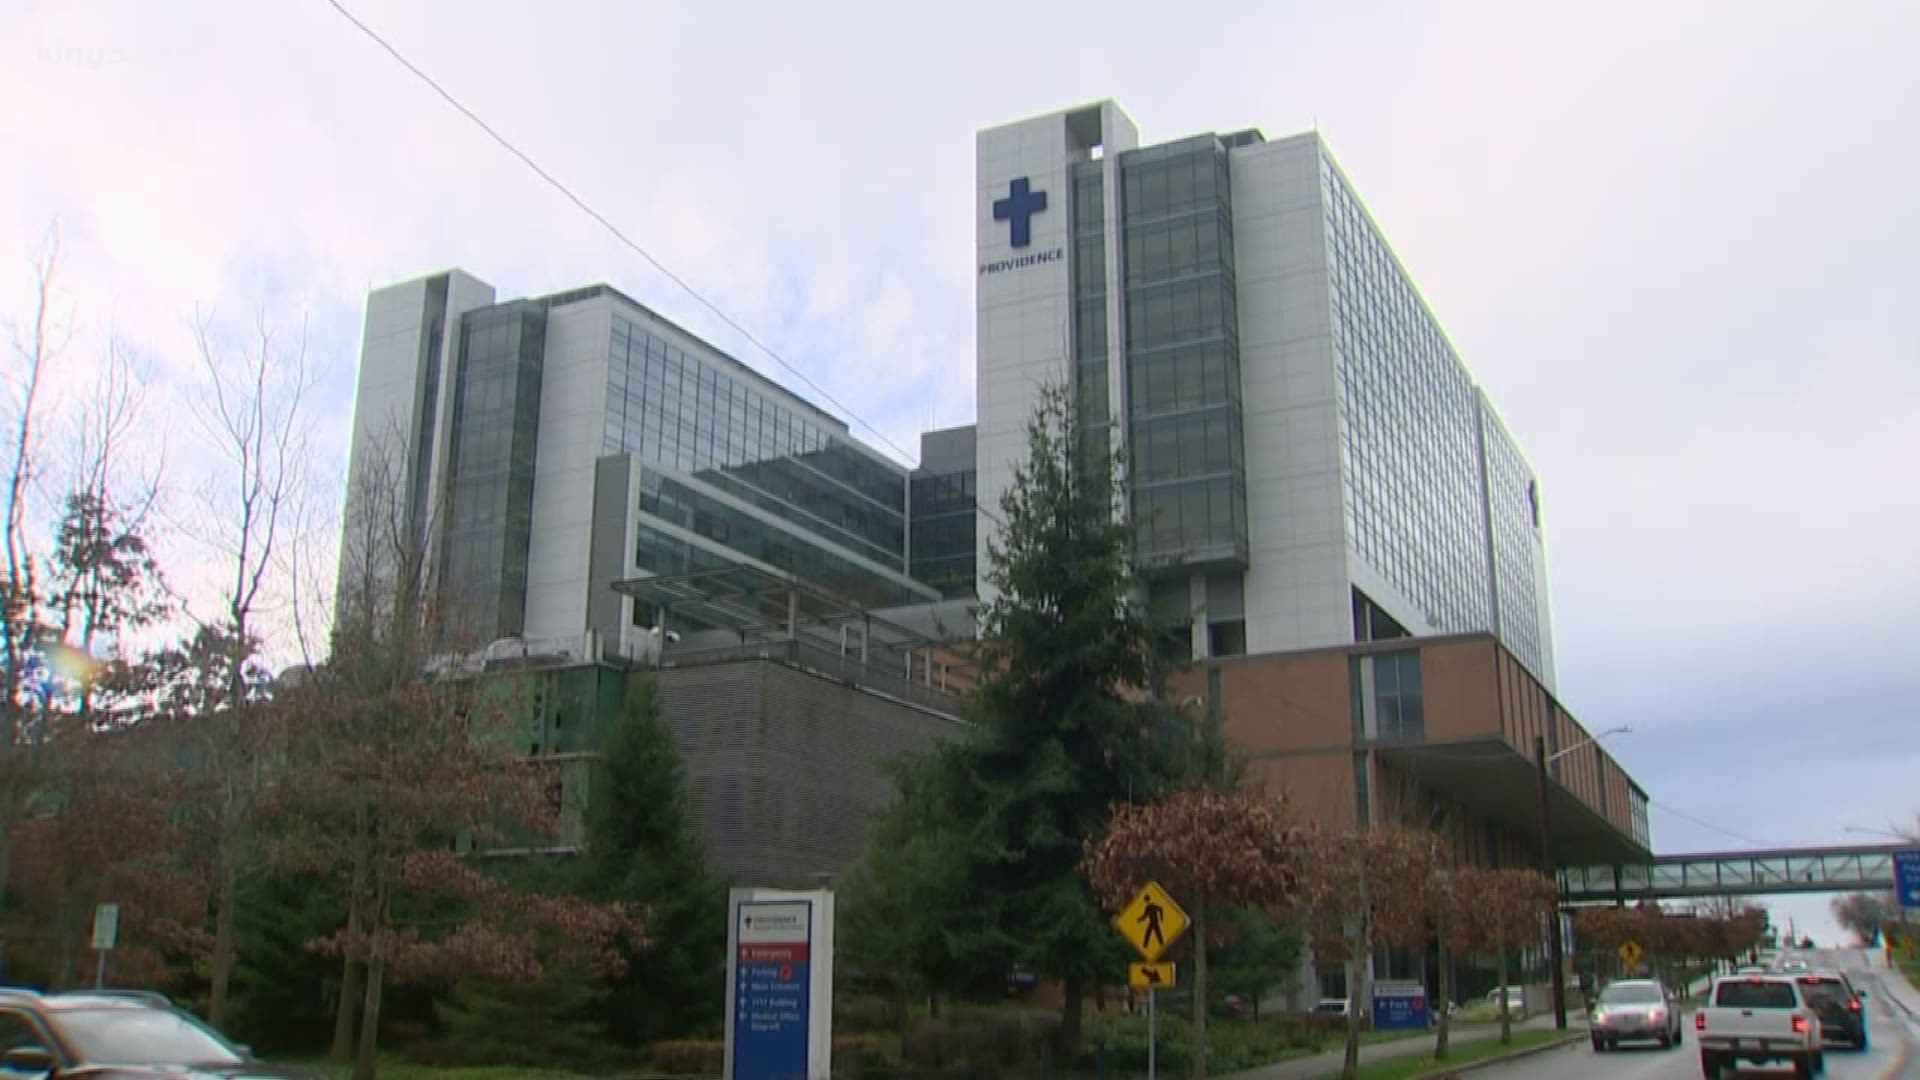 A Snohomish County man came back from Wuhan, China when he came down with symptoms. Public health officials say the public is at low risk.